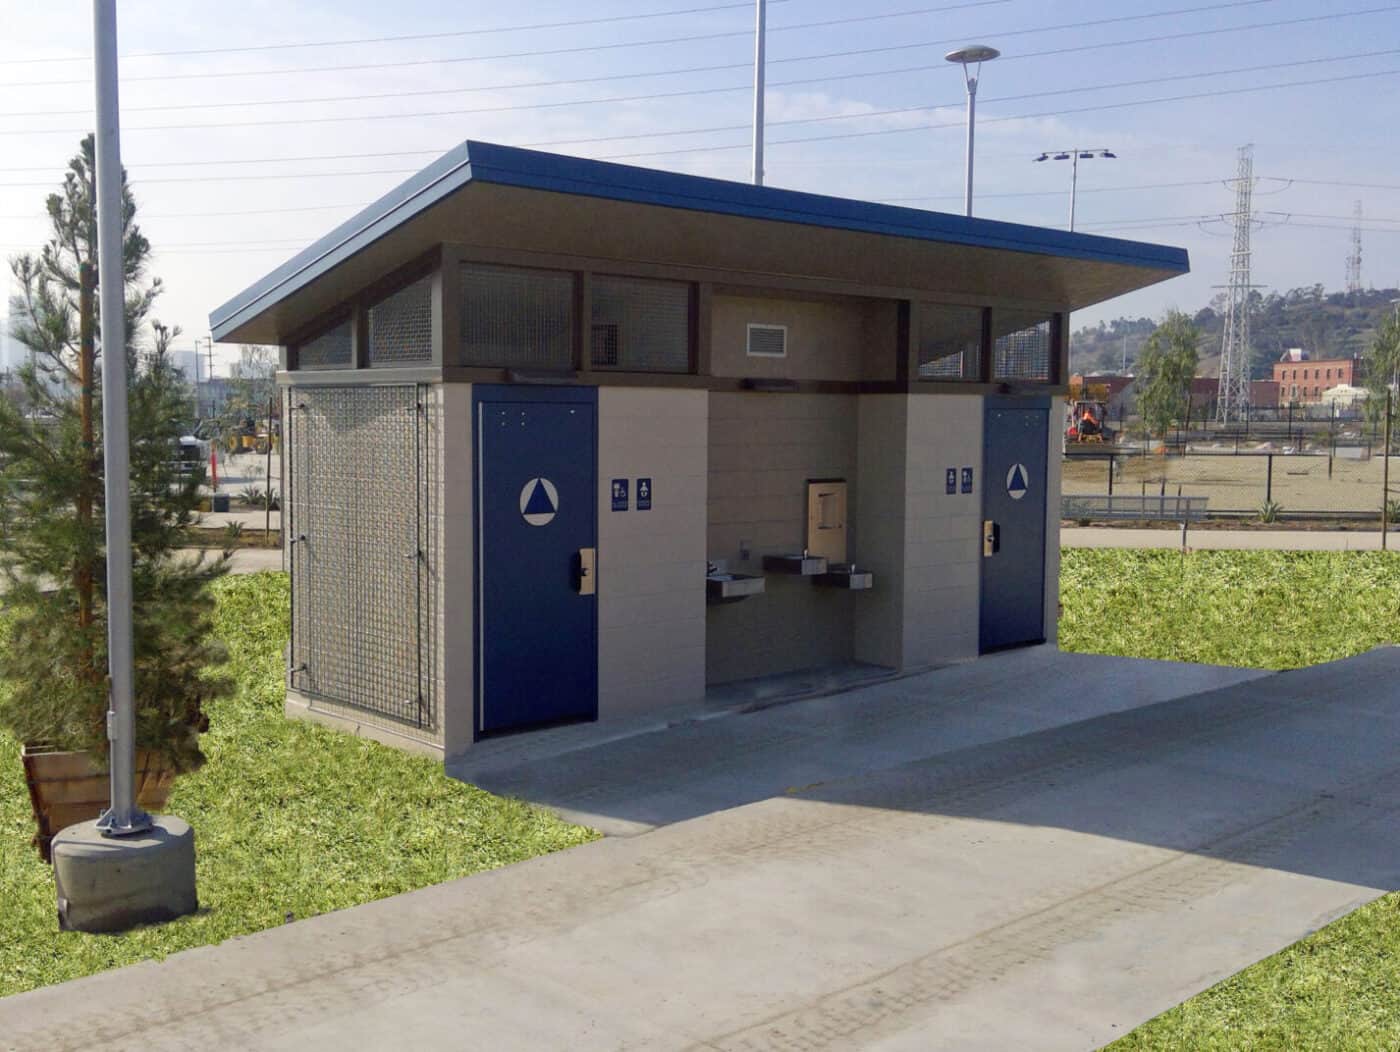 PS-021-Albion Riverside Park (City of Los Angeles CA) installed 12.12.18